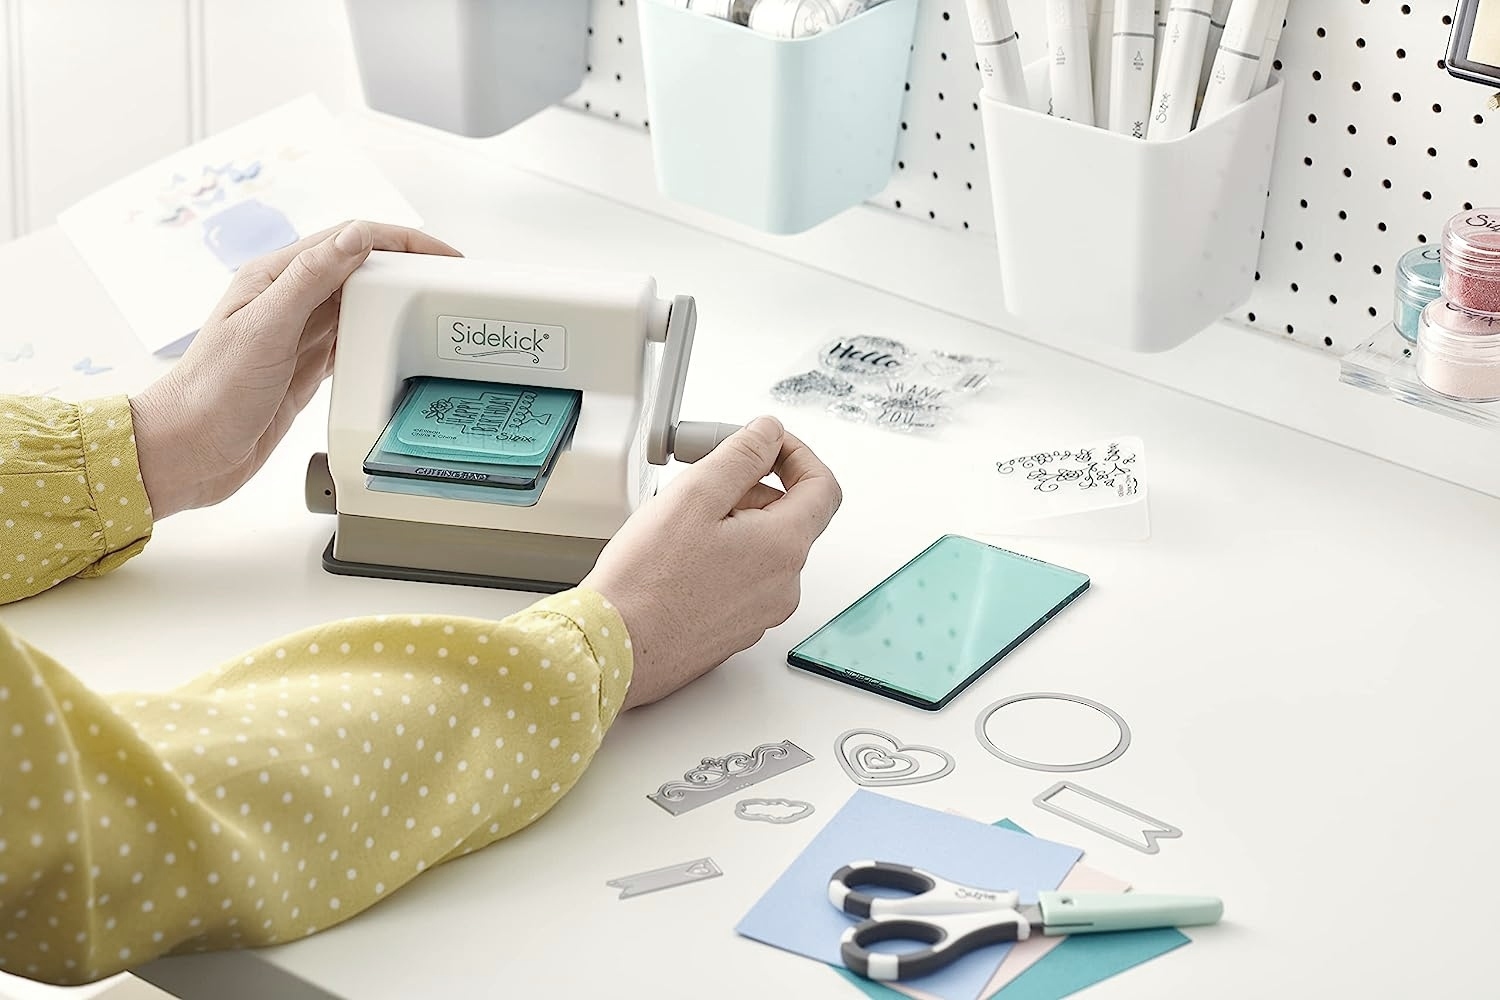 Introducing the Silhouette CAMEO 5 and Exciting New Machines for 2023